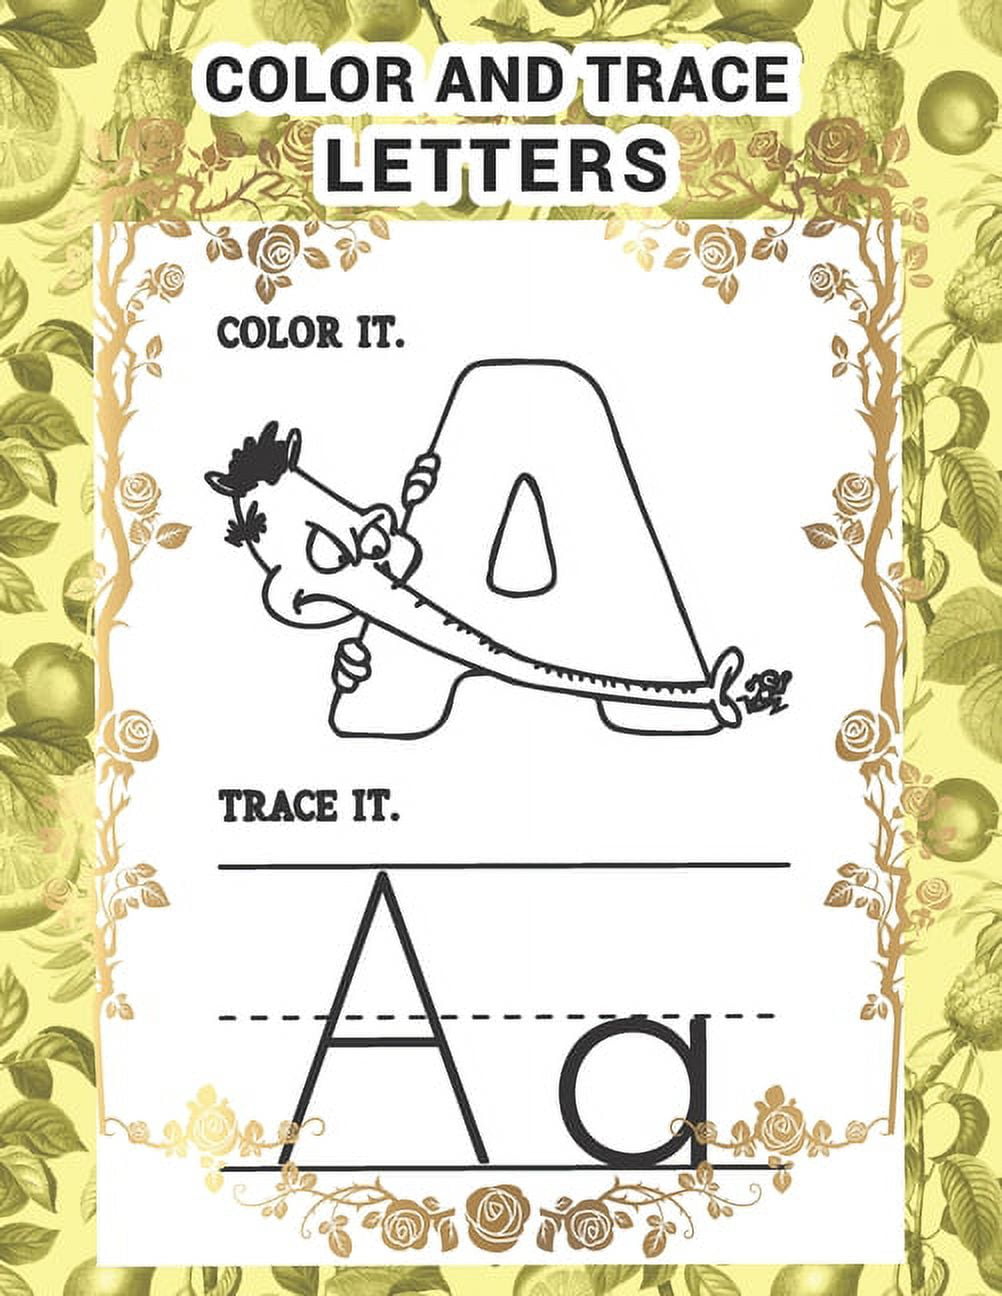 Alphabet Letters Tracing & Coloring Book: 300 pages Alphabet